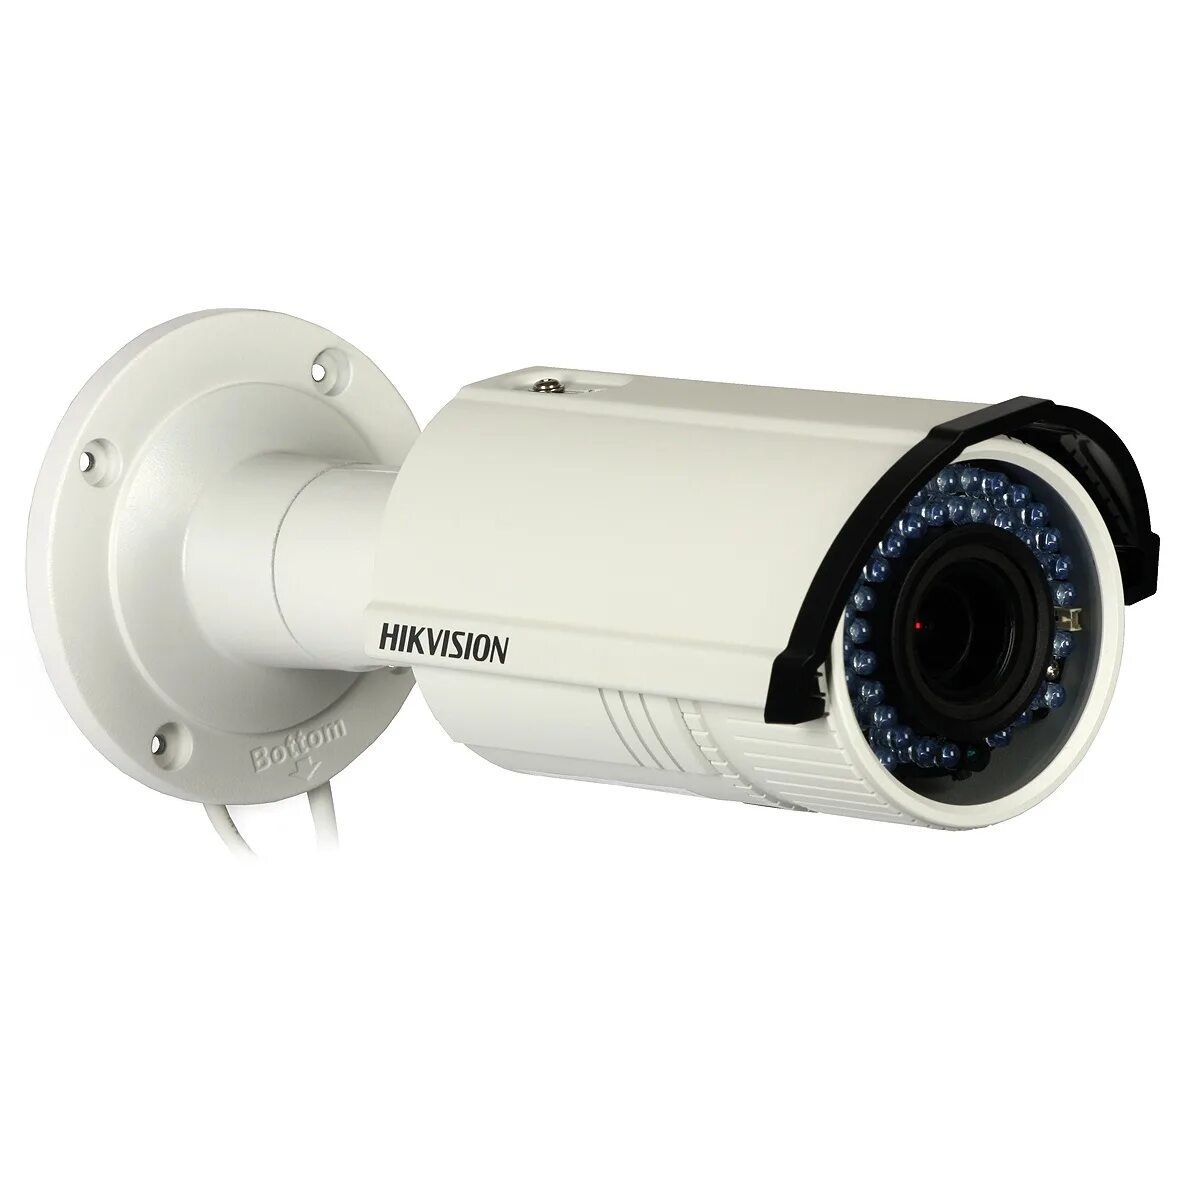 Ip камера 5 мп уличная. Видеокамера Hikvision DS-2cd2622fwd-is. Видеокамера Hikvision DS-2cd2612f-is. Камера IP DS-2cd2620f-i 2.8 - 12 mm 4mp. DS-2cd2642fwd-IZS.